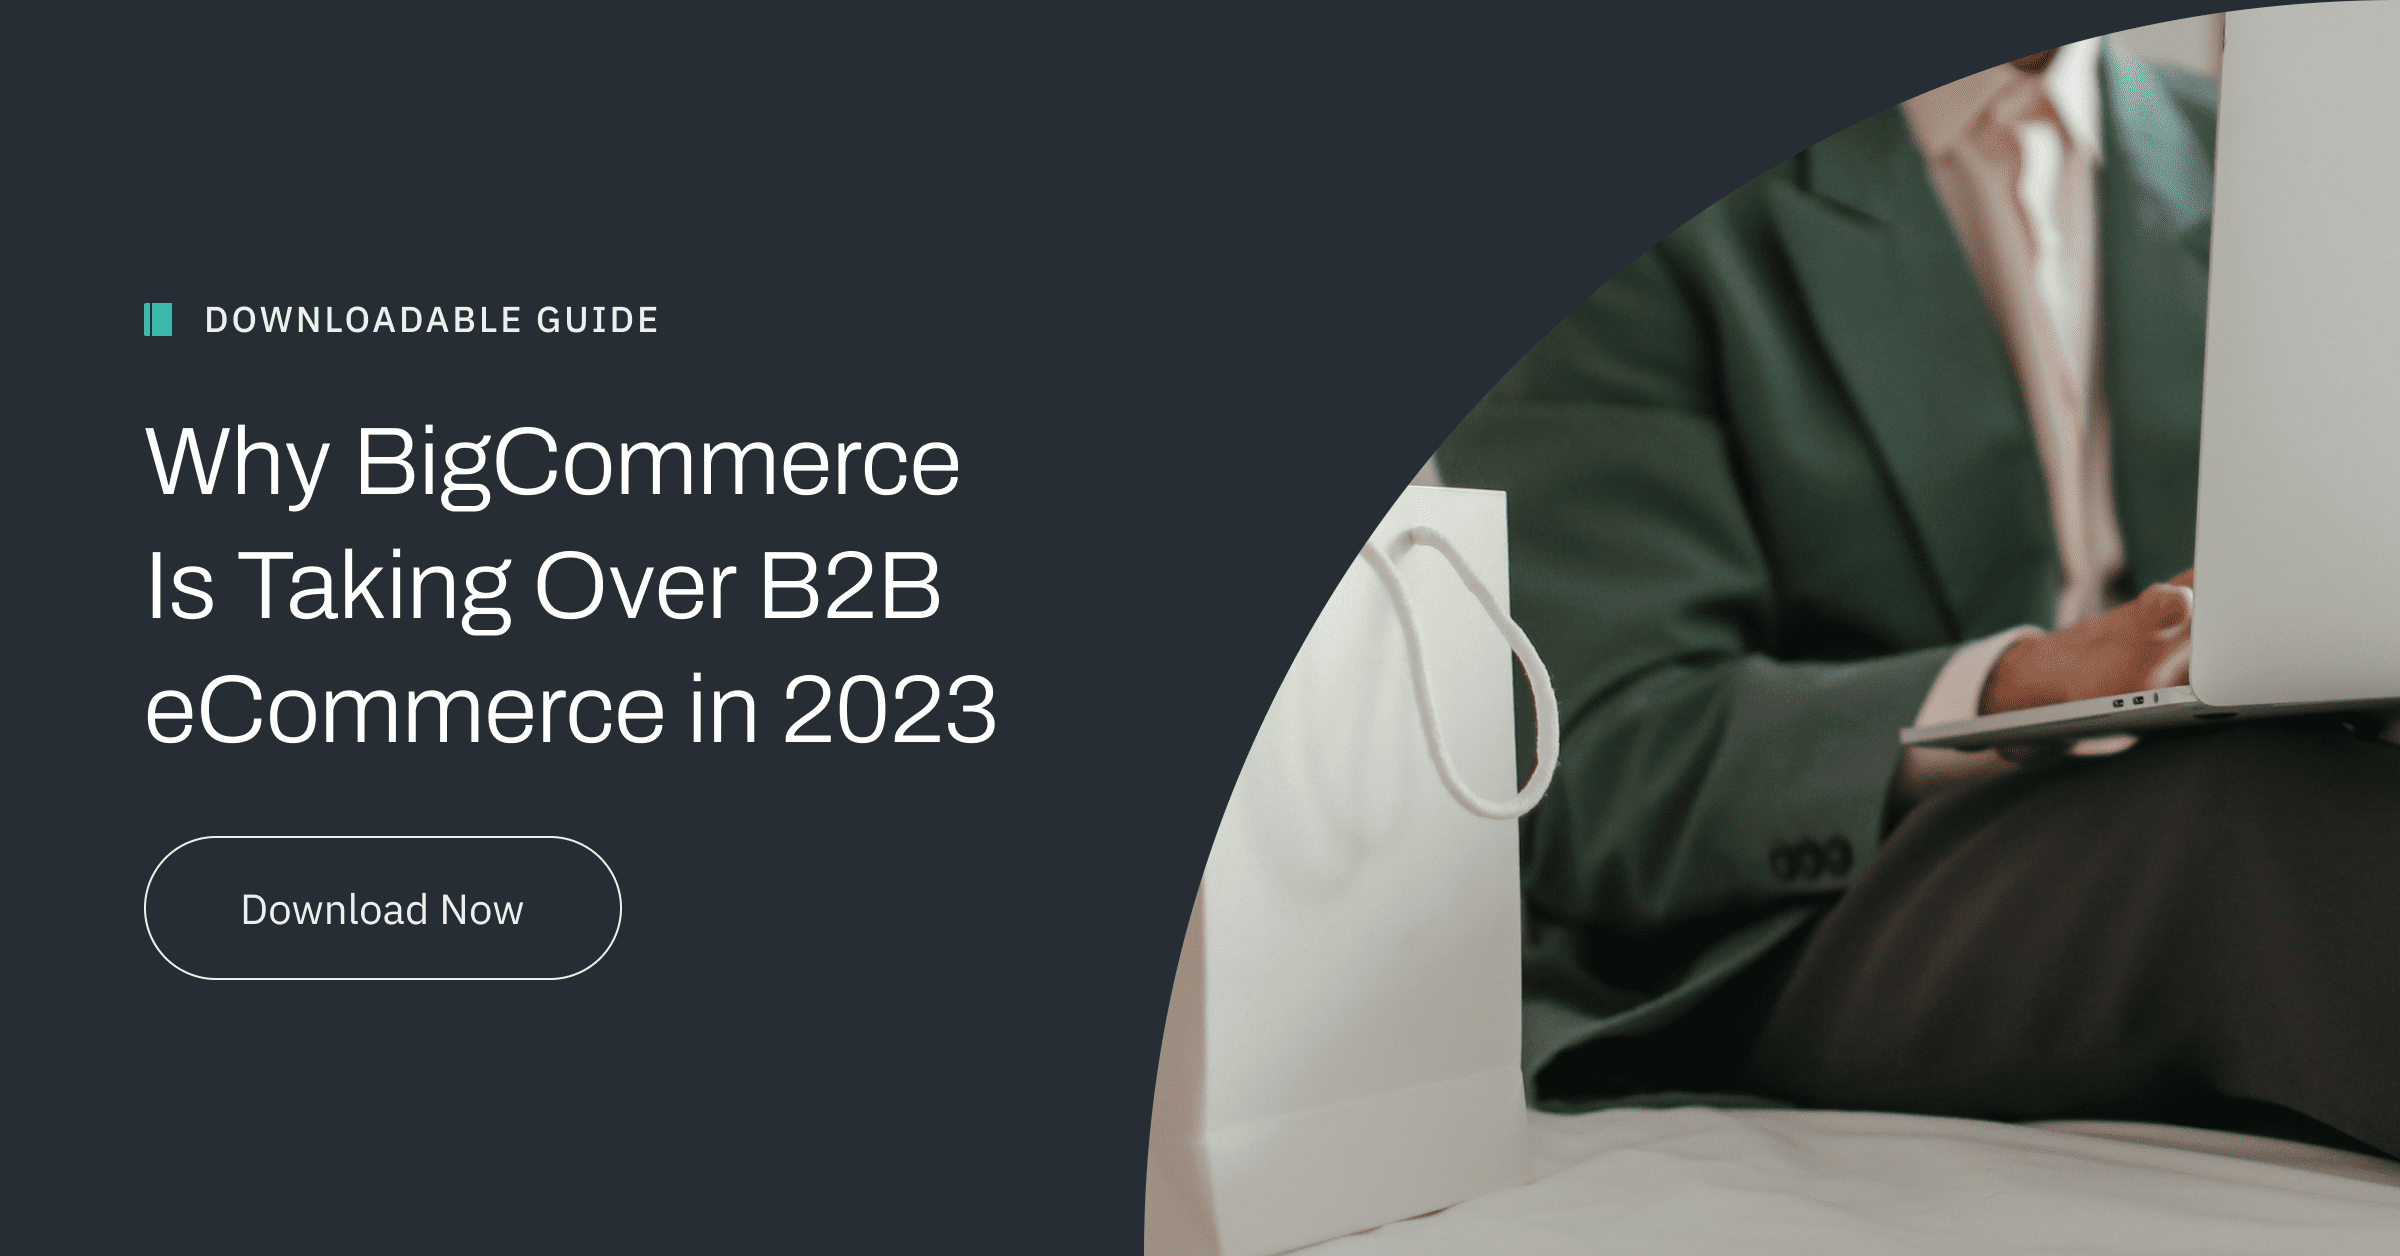 Why BigCommerce Is Taking Over B2B eCommerce in 2023